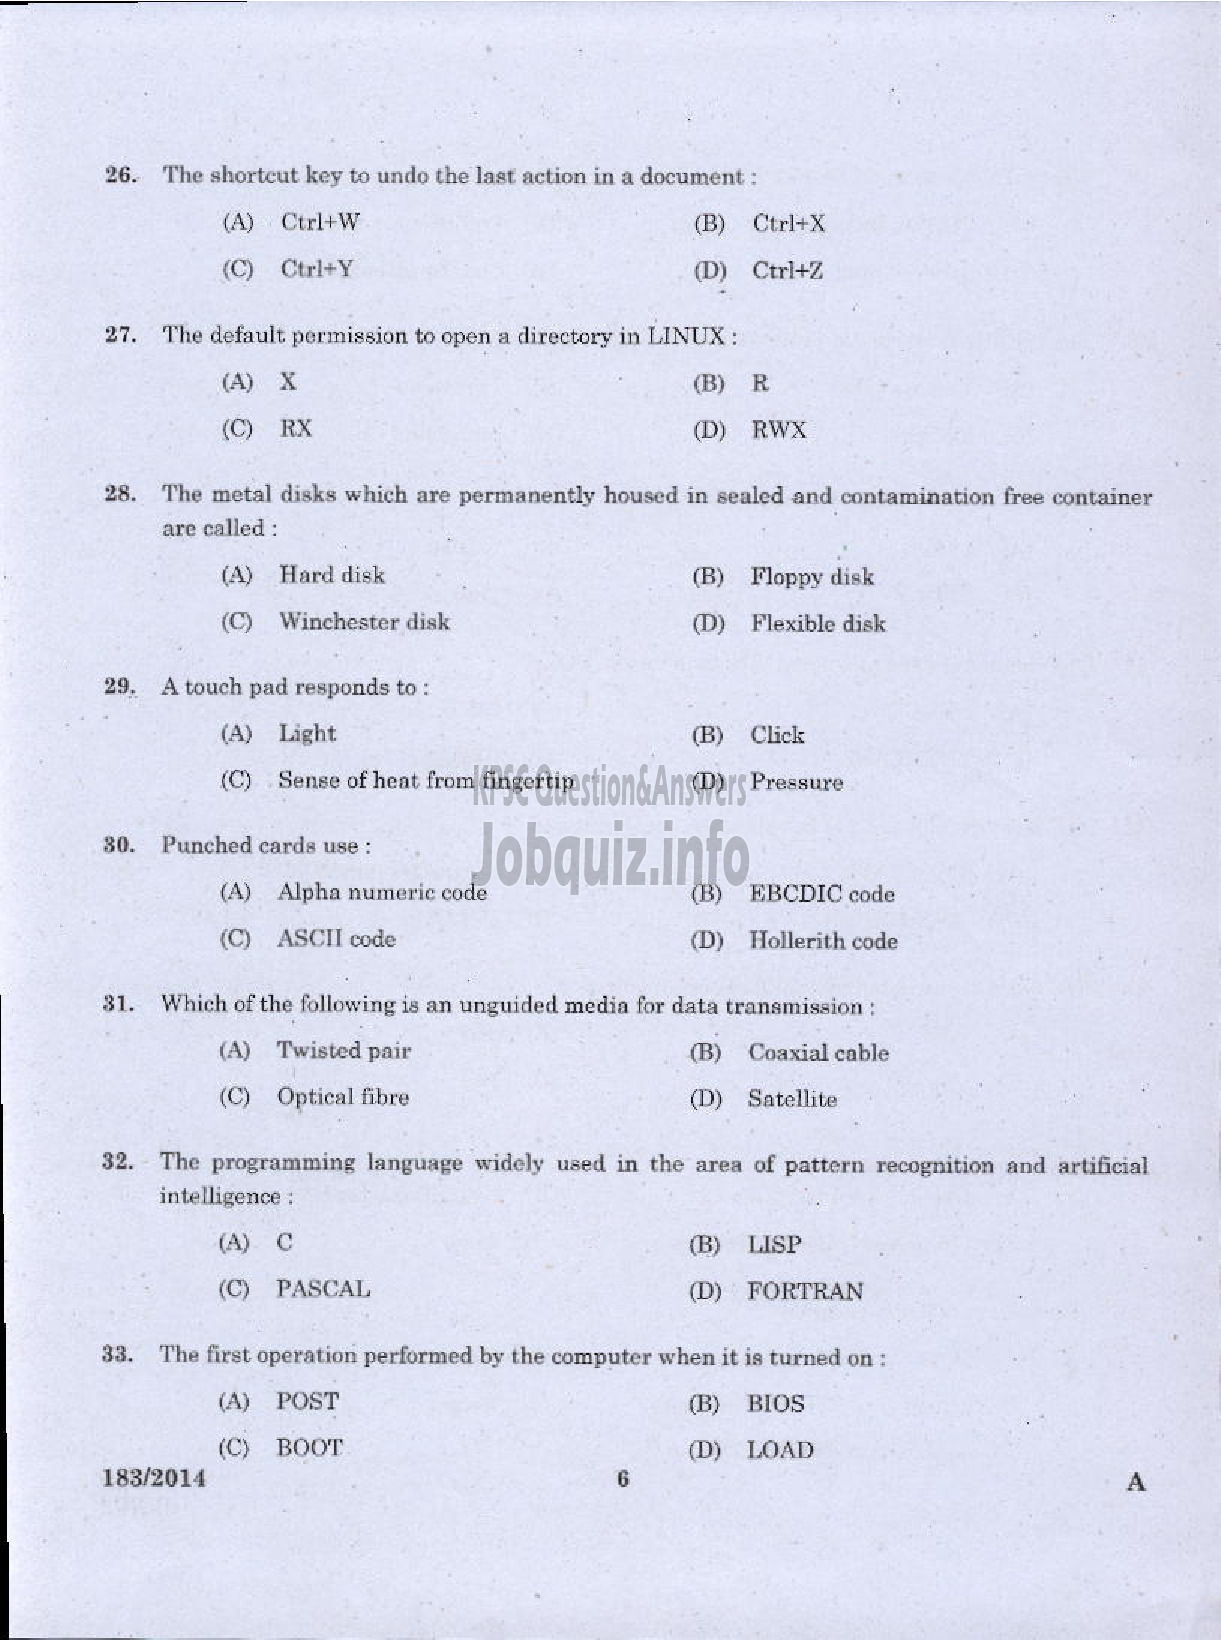 Kerala PSC Question Paper - TRADESMAN COMPUTER ENGINEERING TECHNICAL EDUCATION TVM KGD-4